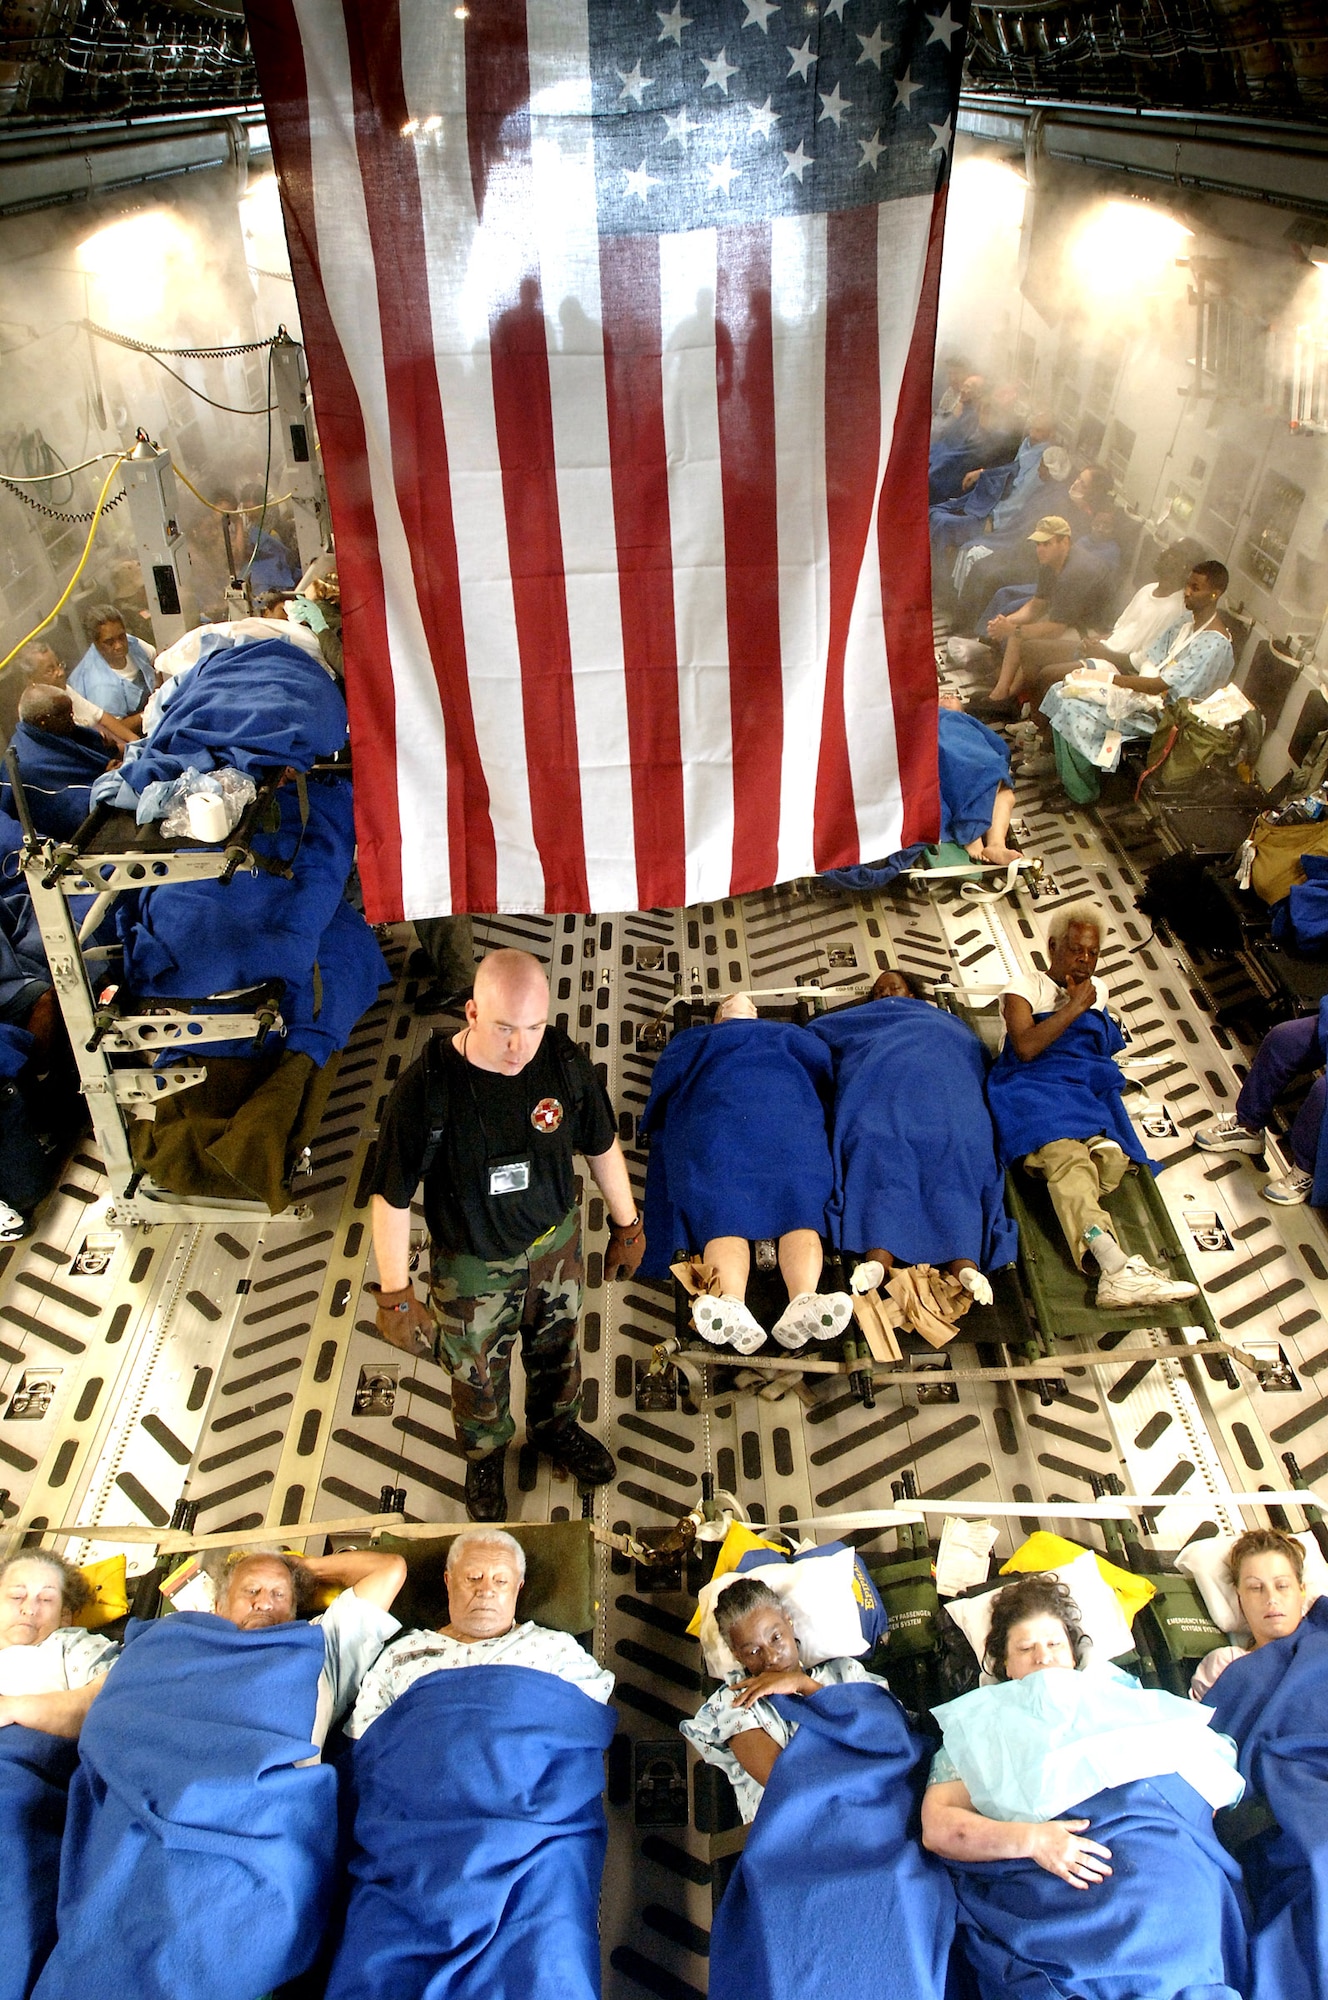 NEW ORLEANS -- Capt. Gary Hardy helps prepare sick and injured people for a flight aboard a C-17 Globemaster III. They are being evacuated from the devastation left by Hurricane Katrina to Dobbins Air Force Base, Ga. Captain Hardy a flight nurse with the 43rd Aeromedical Evacuation Squadron, at Pope AFB, N.C., and other Air Force Critical Care Aeromedical Teams have cared for thousands of evacuees. The aircraft and flight crew are from the 446th Airlift Wing at McChord Air Force Base, Wash. (U.S. Air Force photo Master Sgt. Lance Cheung)